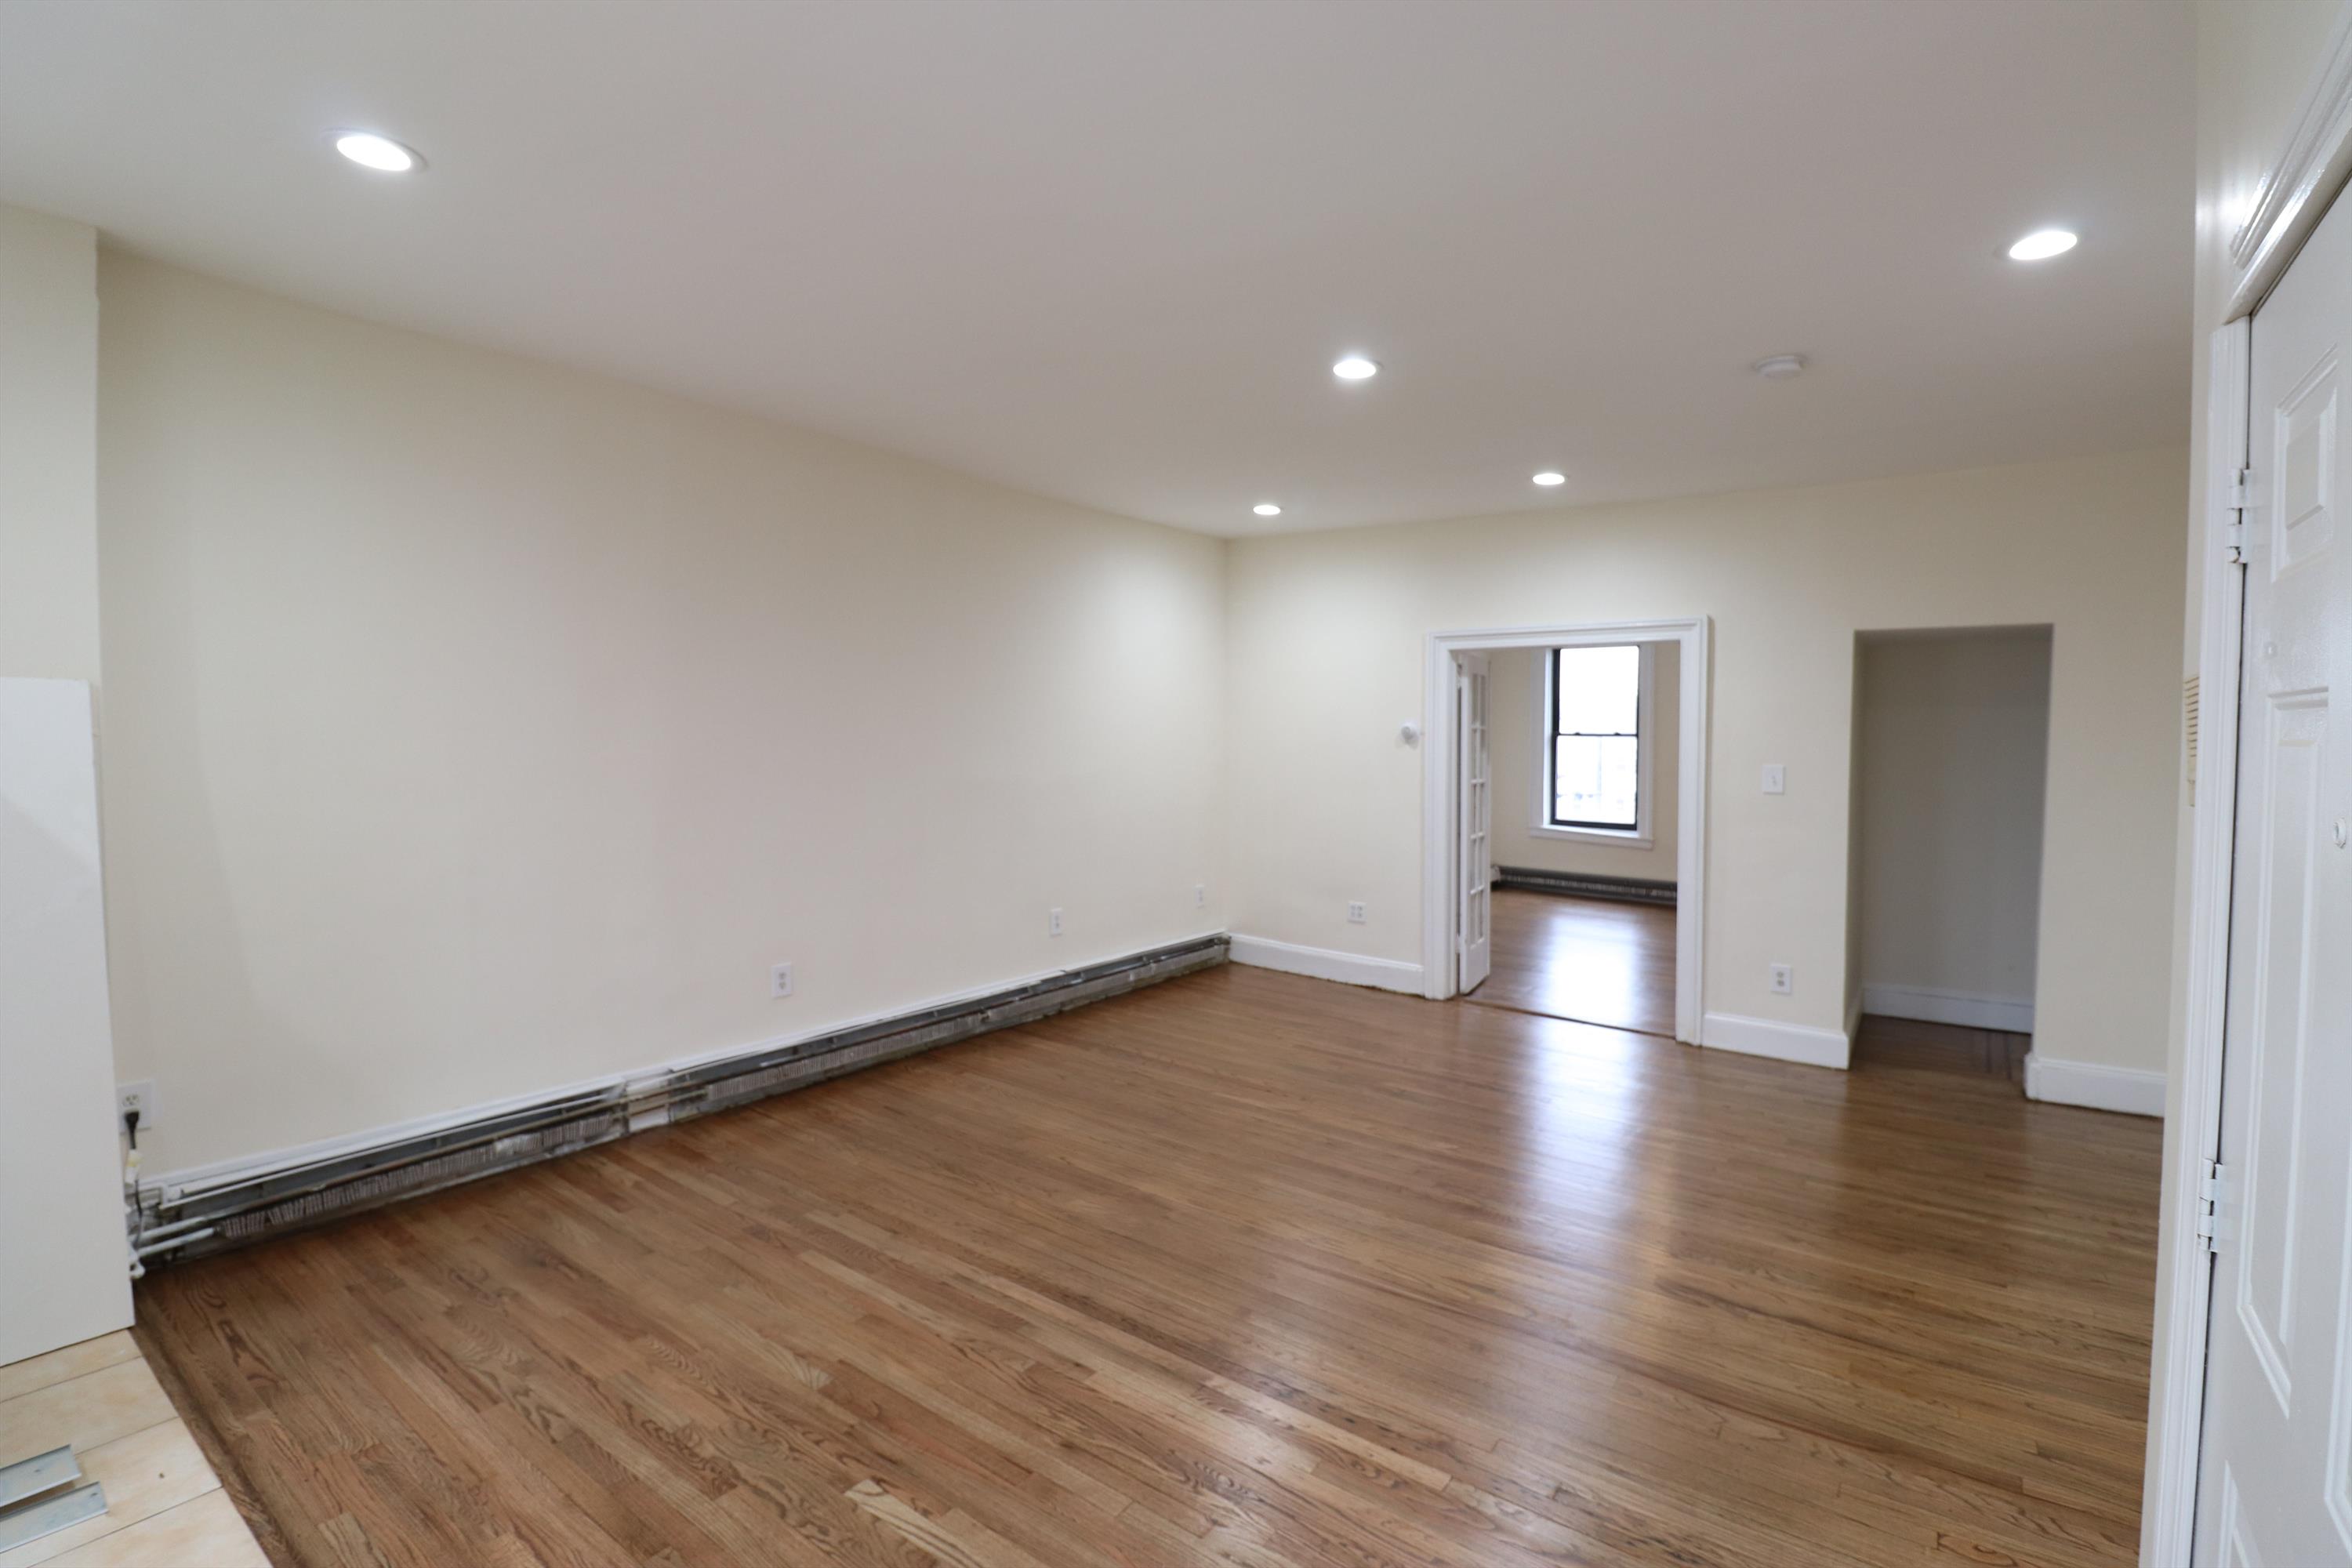 **NO BROKER FEE** Great deal two bedroom one bath with a fantastic open layout! This unit features great light exposure and hardwood floors. This is a fantastic deal in a good centralized location in Jersey City Heights with bus stops within 1-2 blocks away, close to Riverview Park and the 2nd street light rail station right down the Hoboken steps. Available Feb 1st 2021. No Pets